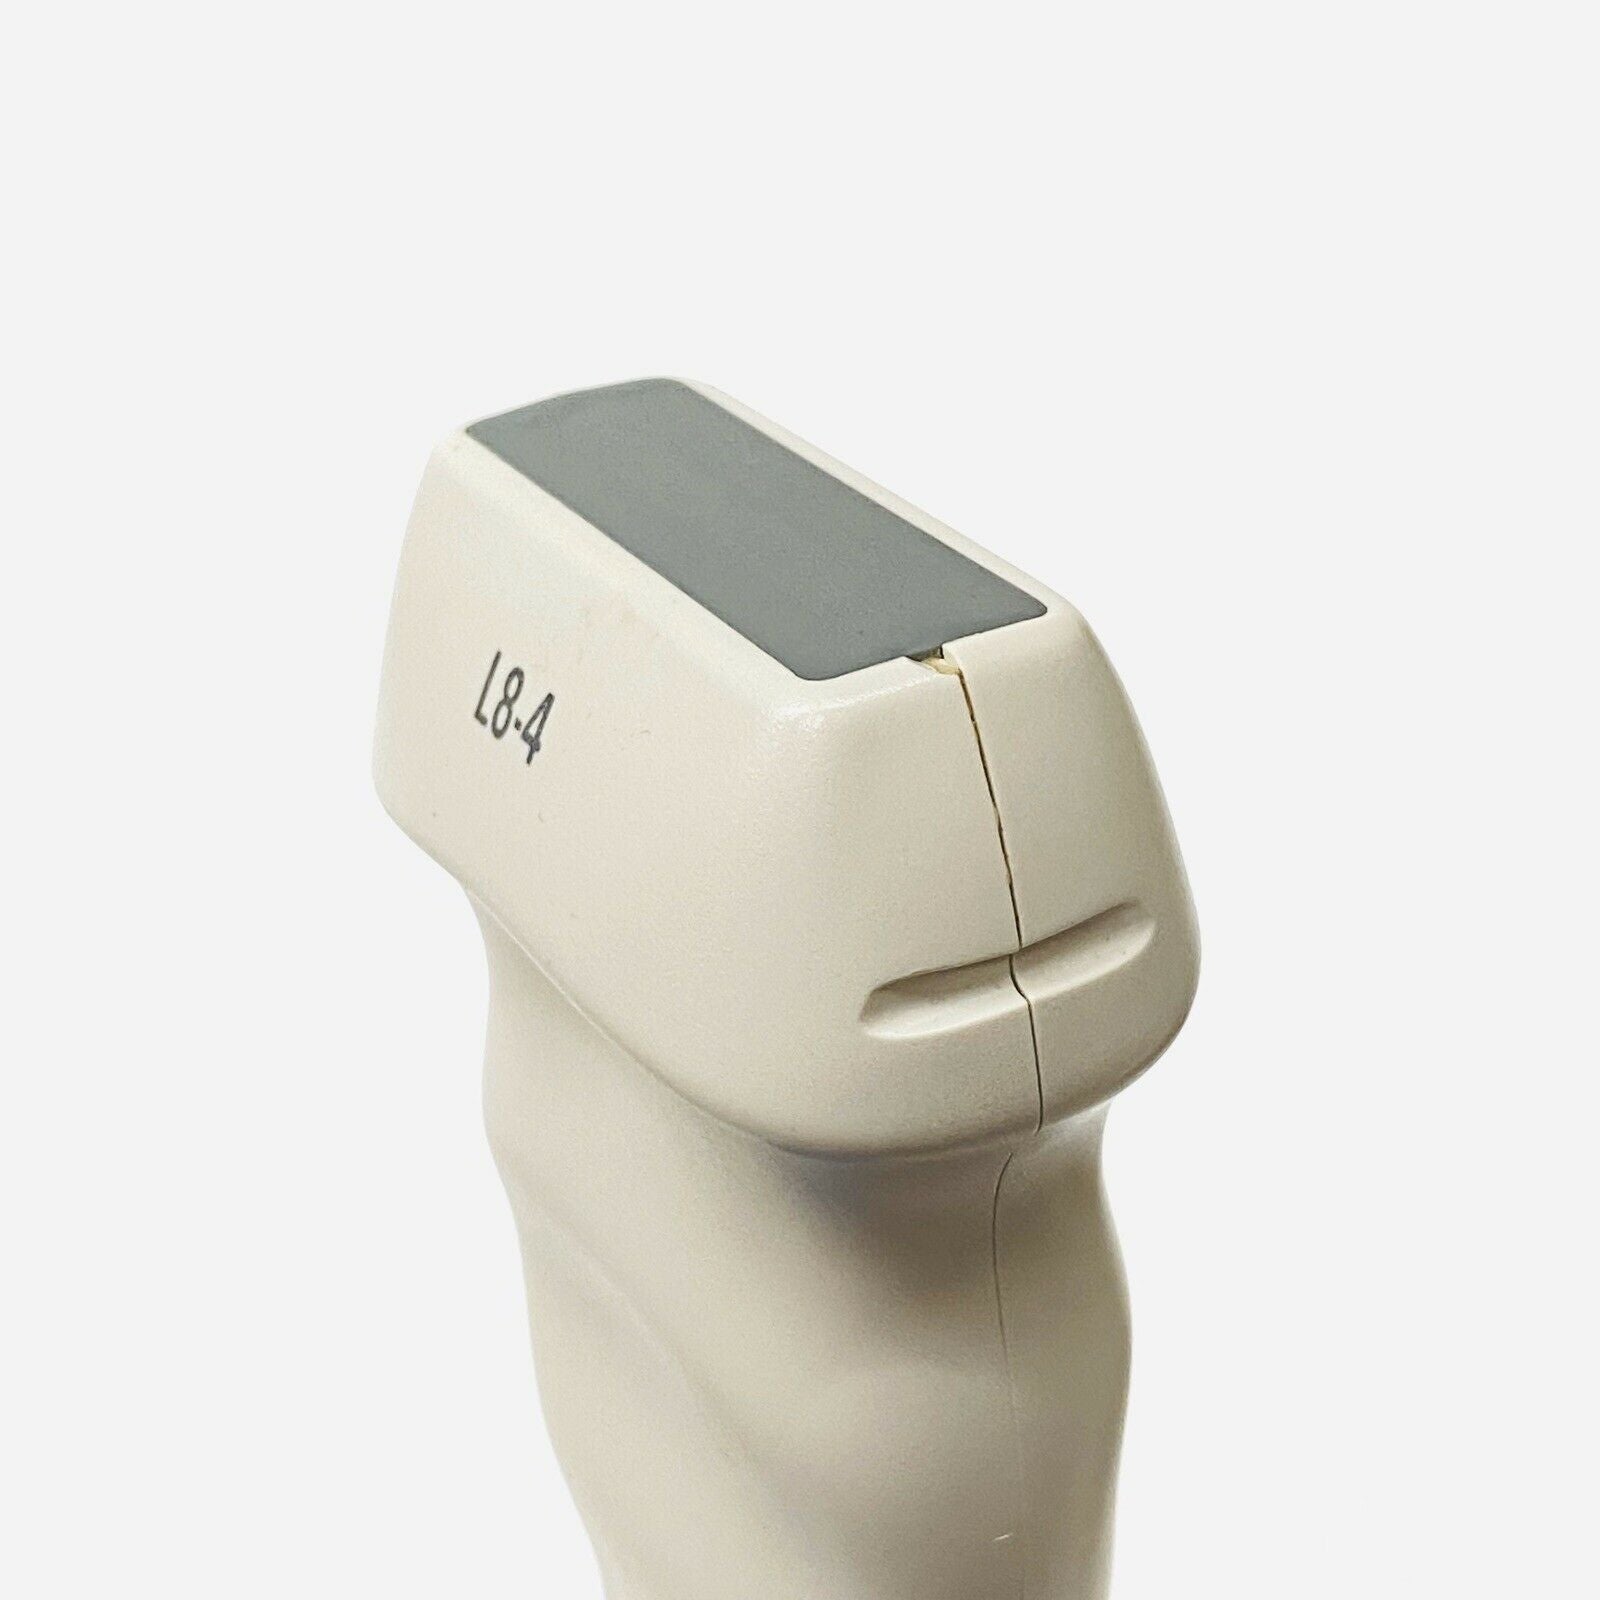 Philips L8-4 Linear Ultrasound Transducer Probe DIAGNOSTIC ULTRASOUND MACHINES FOR SALE